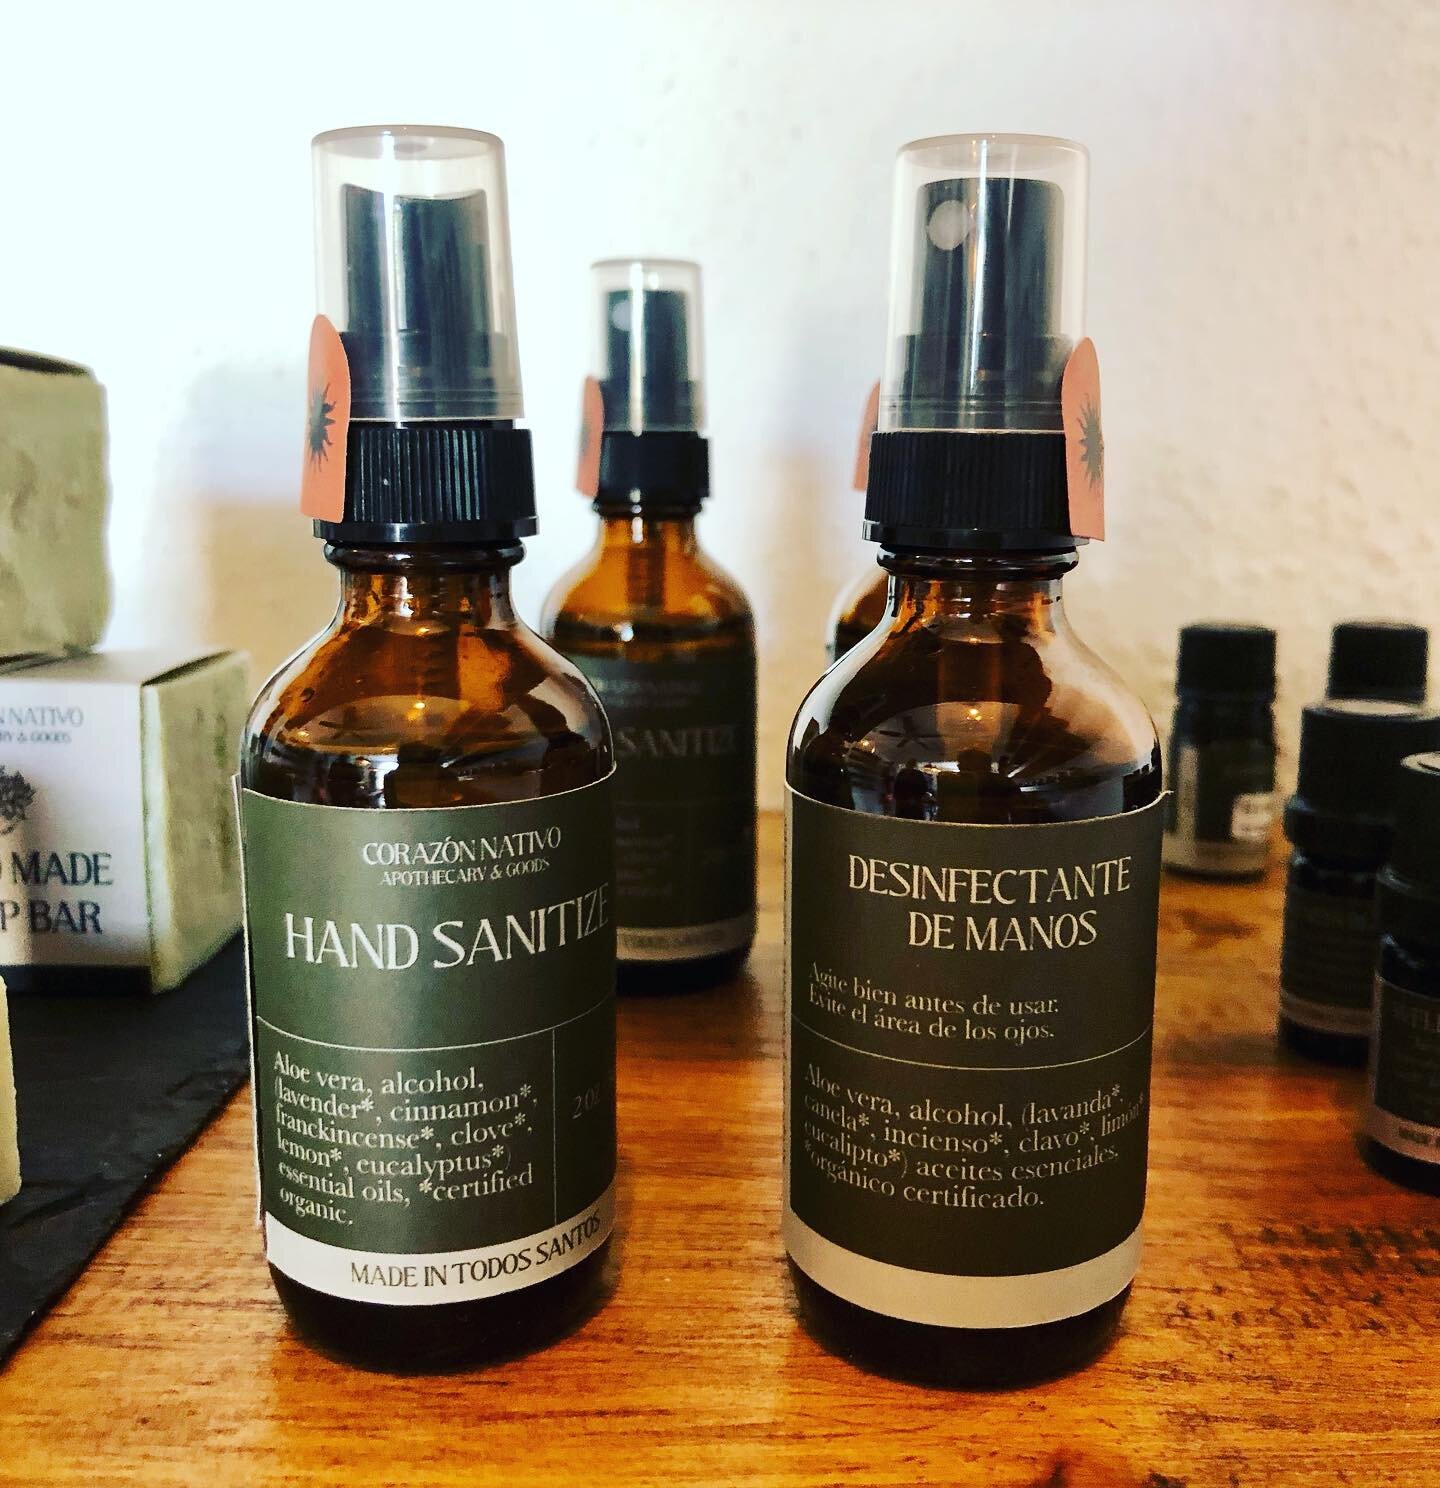 **New product Alert!** Our homemade hand sanitizer made with our essential oil Wellness blend of organic oils, alcohol, aloe Vera and glycerin for extra moisturizing. All natural, organic ingredients great for travel. I still wipe down the plane, tra